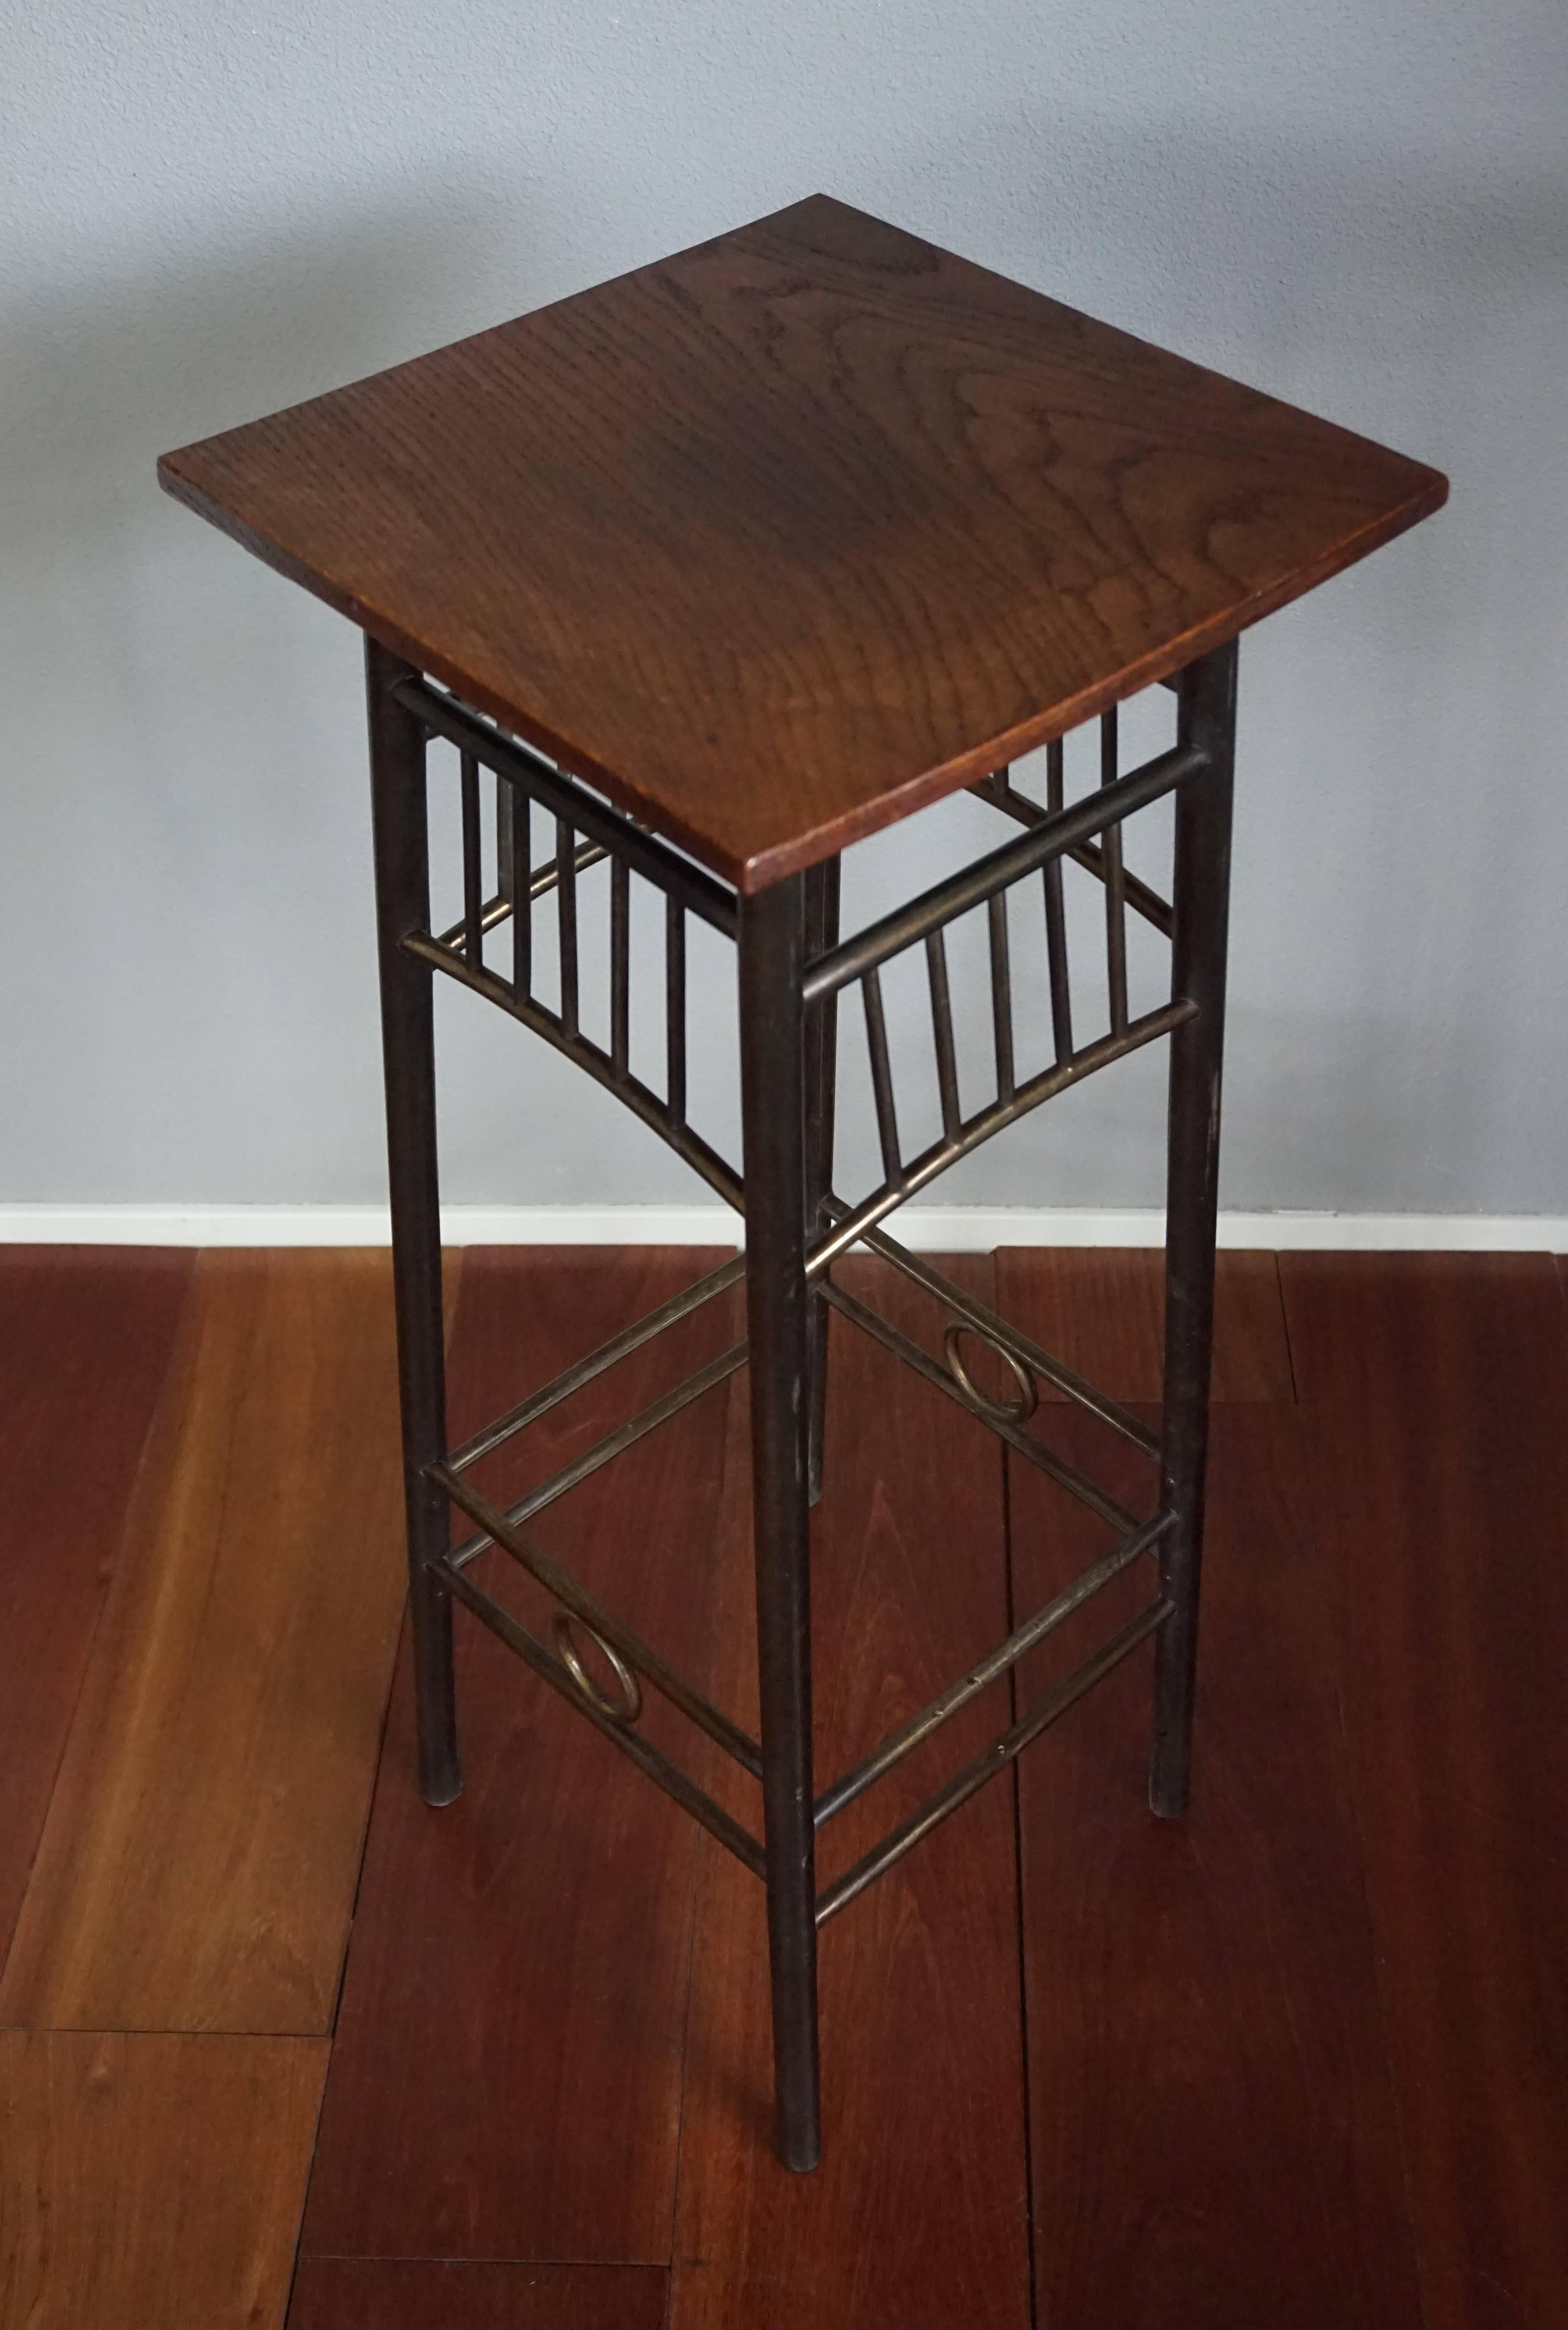 Vienna Secession Viennese Secession Brass Plant Stand with Solid Oak Top Kolomon Moser Style For Sale